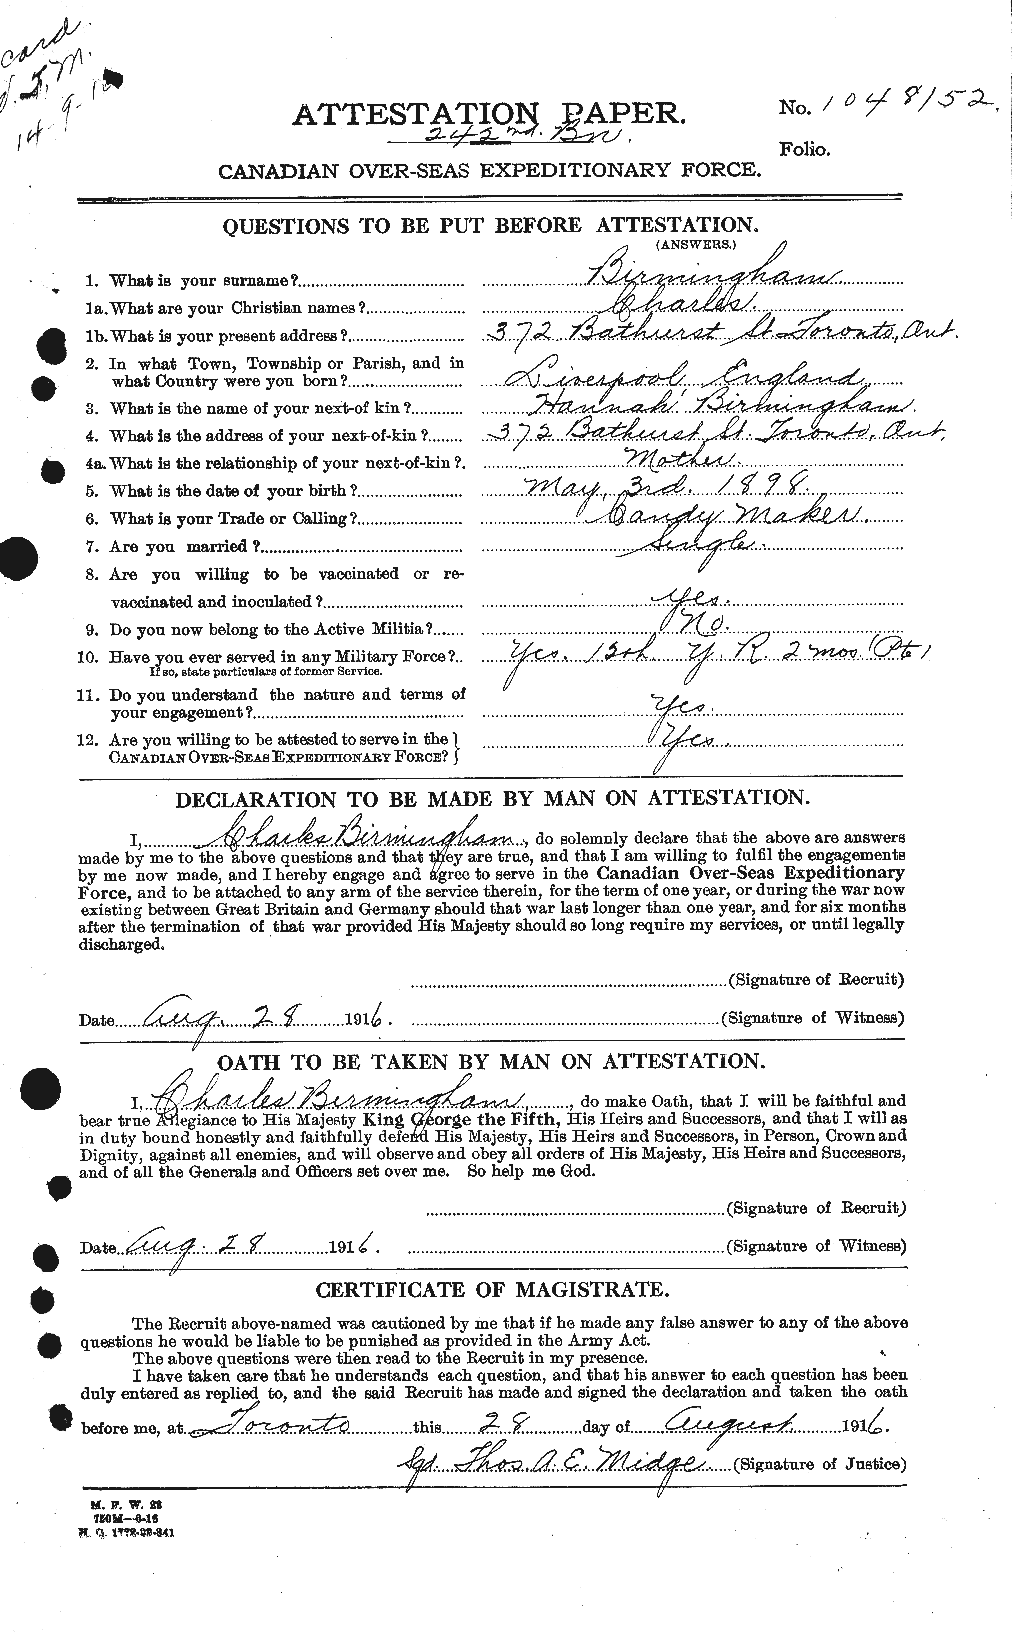 Personnel Records of the First World War - CEF 243927a